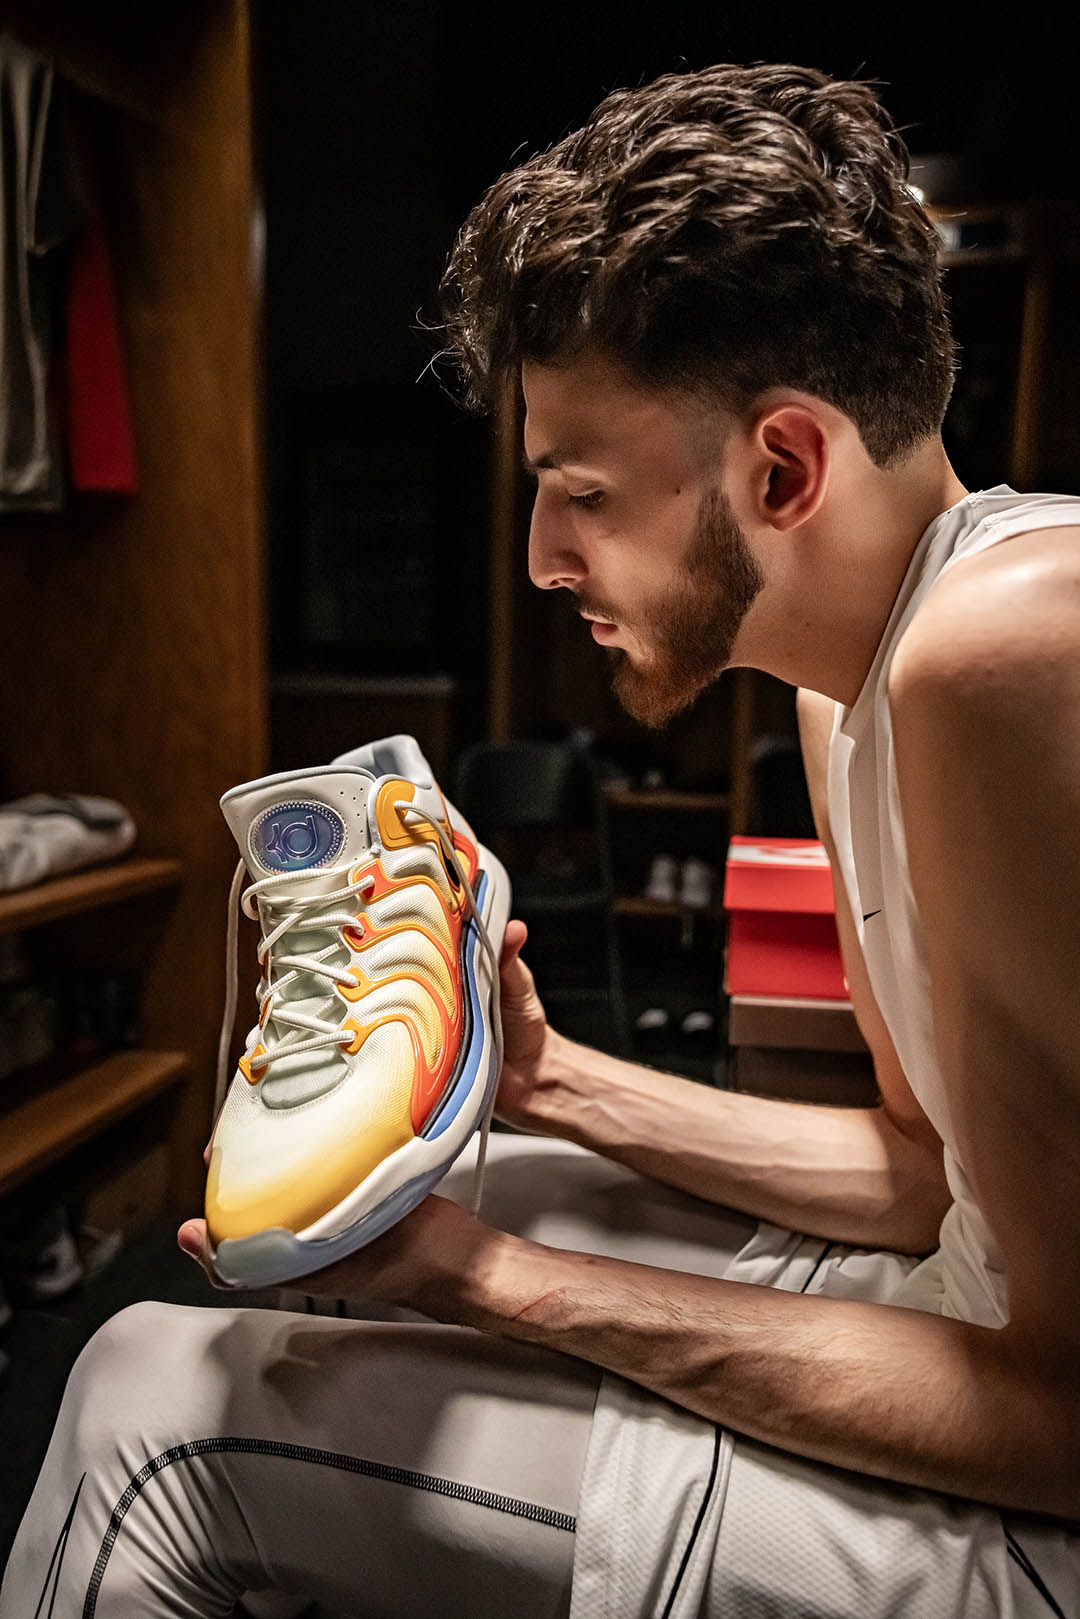 Chet Holmgren is Continuing Kevin Durant’s Sneaker Legacy in OKC